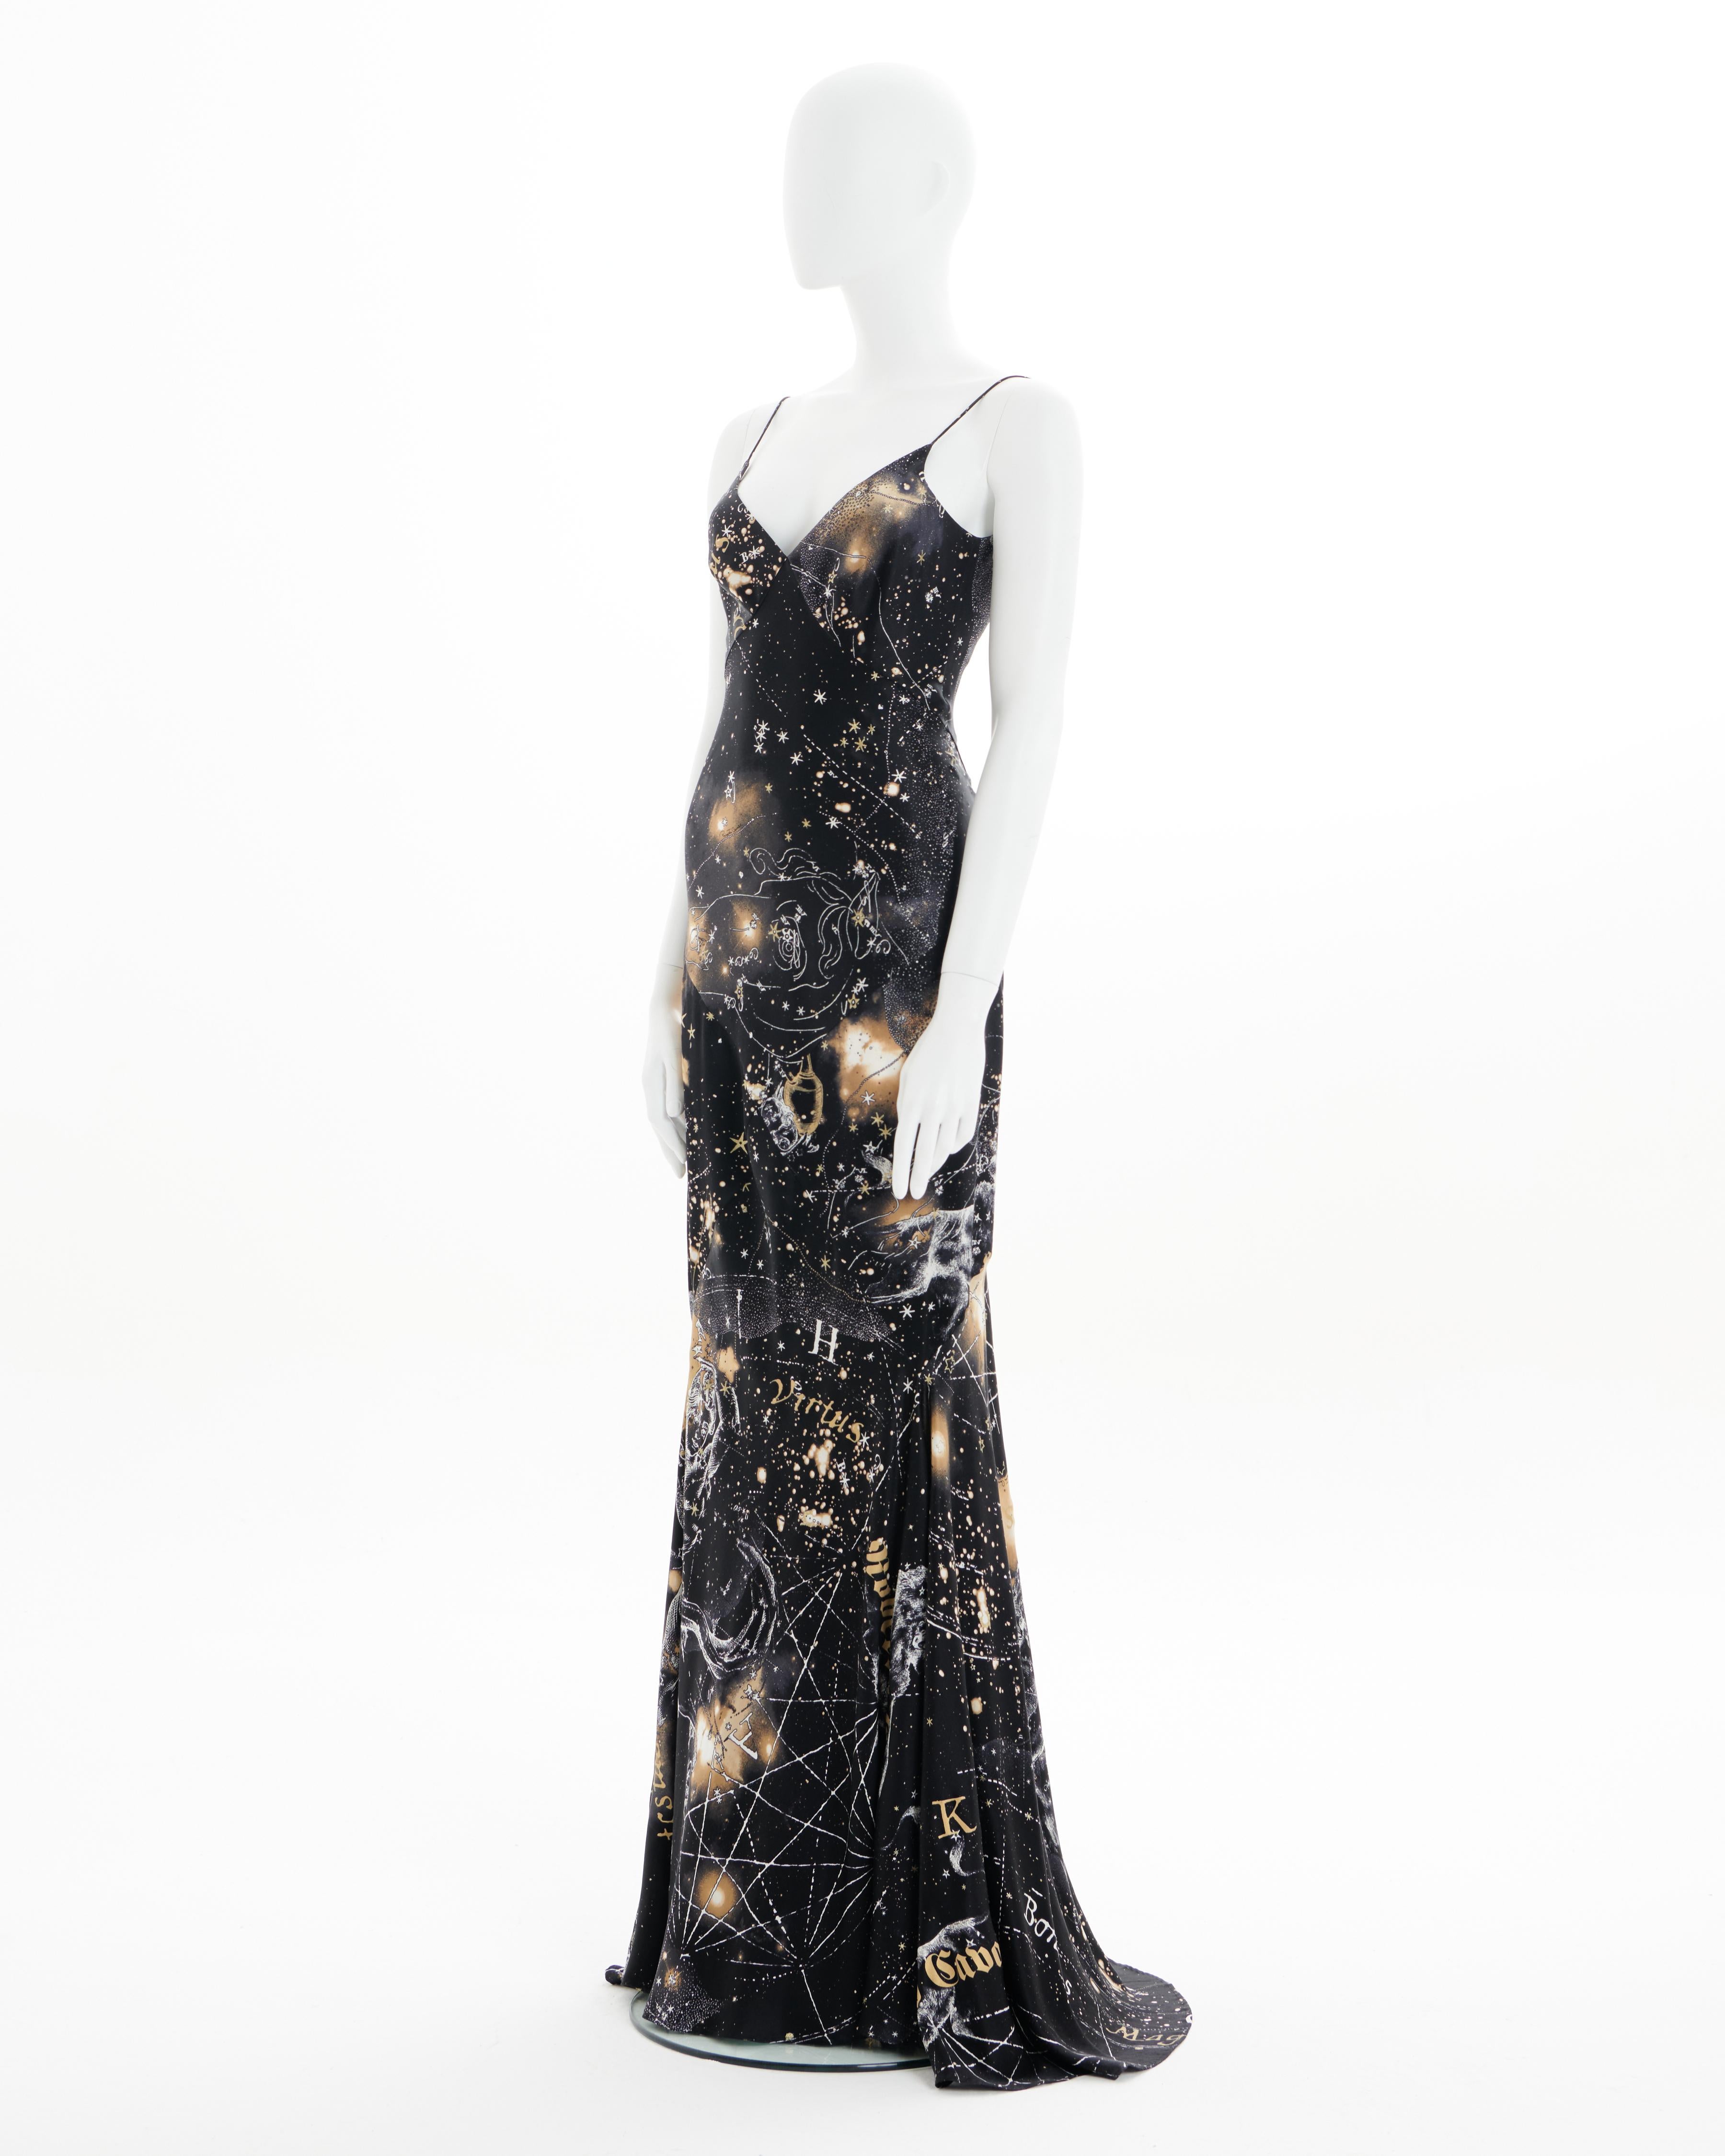 - Roberto Cavalli
- Sold by Skof.Archive 
- Fall - Winter 2008 
- Celestial star-chart gown 
- Seamed constellation printed crepe hugs all of the curves and features a range of star maps, calligraphic lettering, taurus stars, and the rest of the